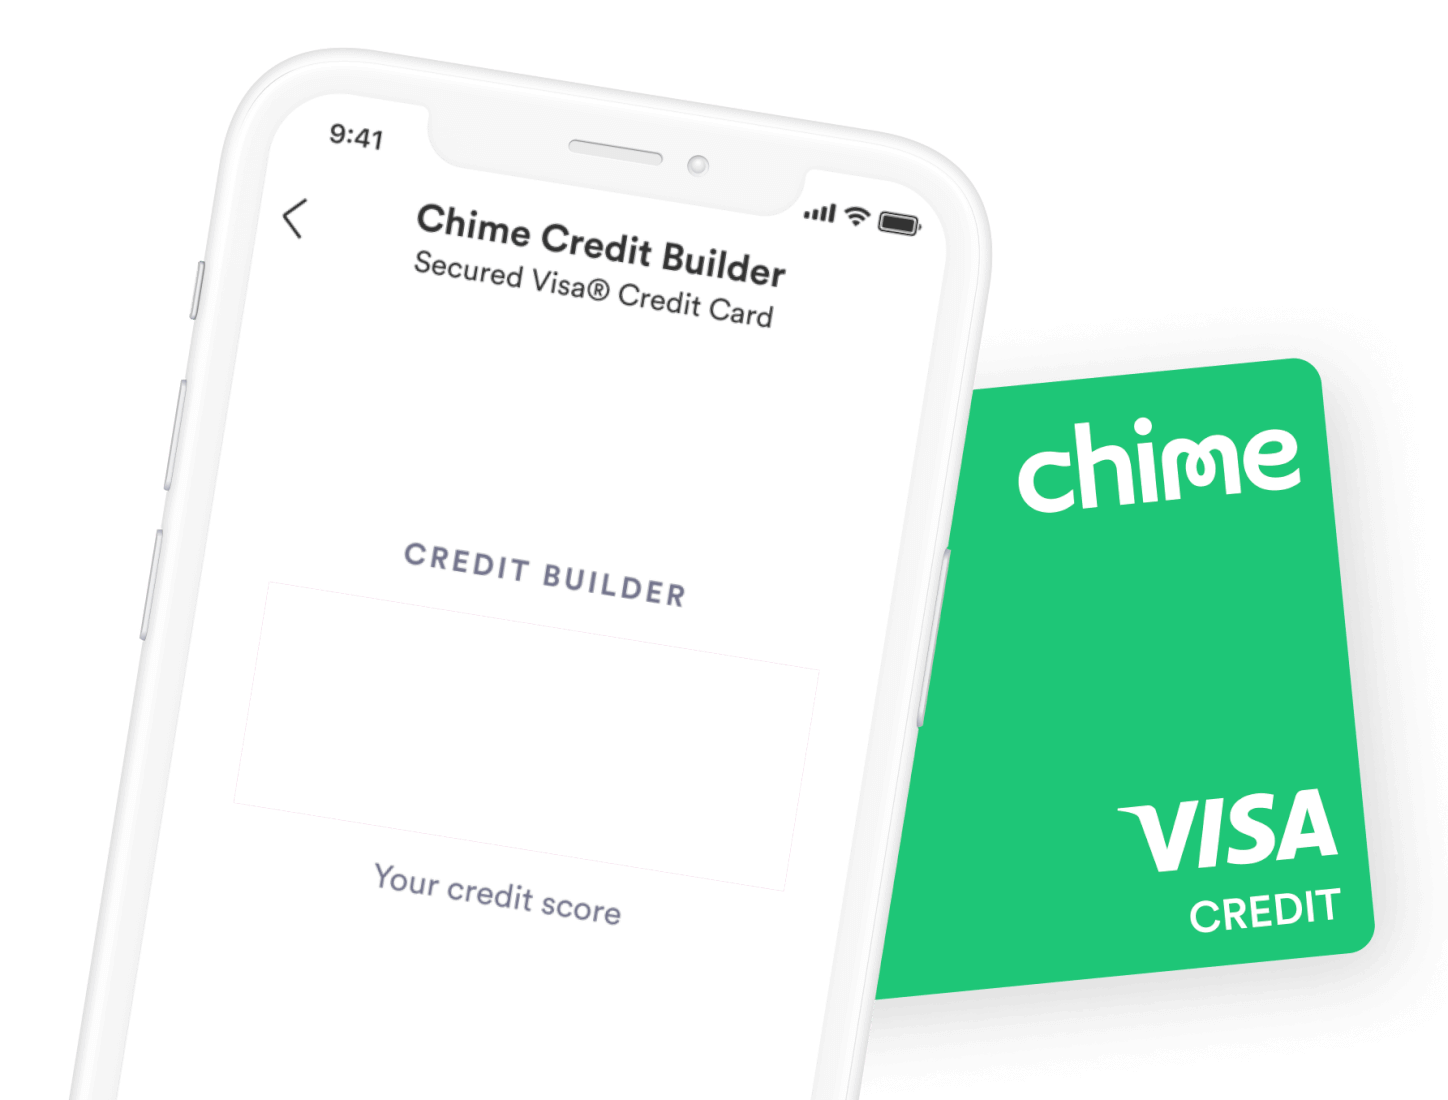 Can You Withdraw Cash from Chime Credit Builder Card? 1